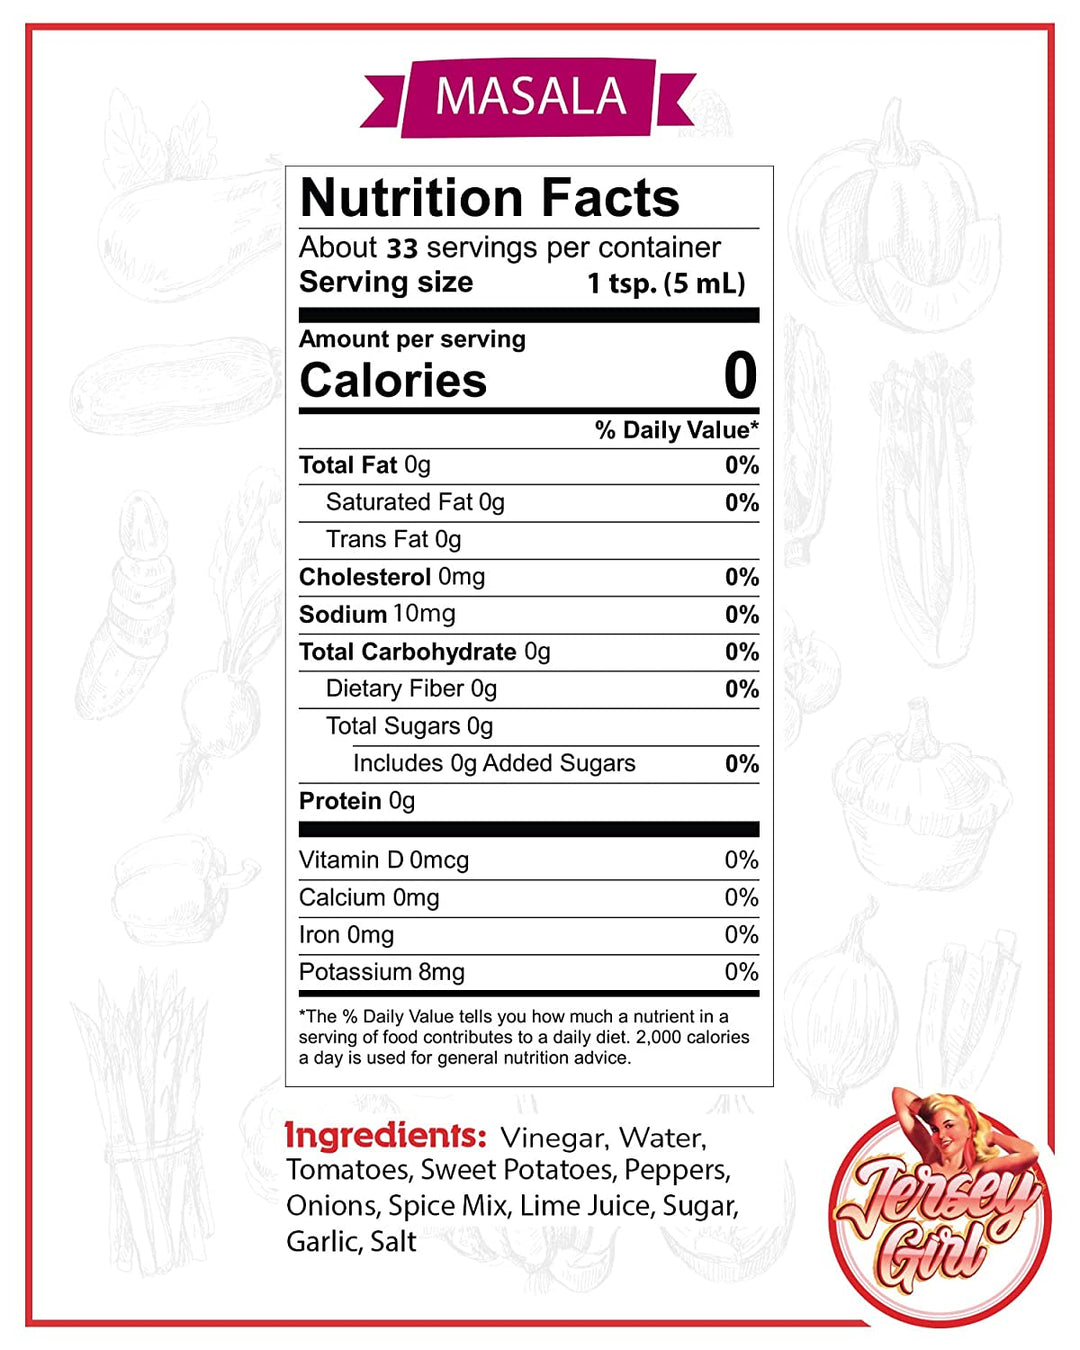 Jersey Girl Hot Sauce - Indian Masala Hot Sauce - Nutrition Label  Vinegar, Water, Tomatoes, Sweet Potatoes, Peppers, Indian Spice Mix, Onions, Lime Juice, Sugar, Garlic, Salt